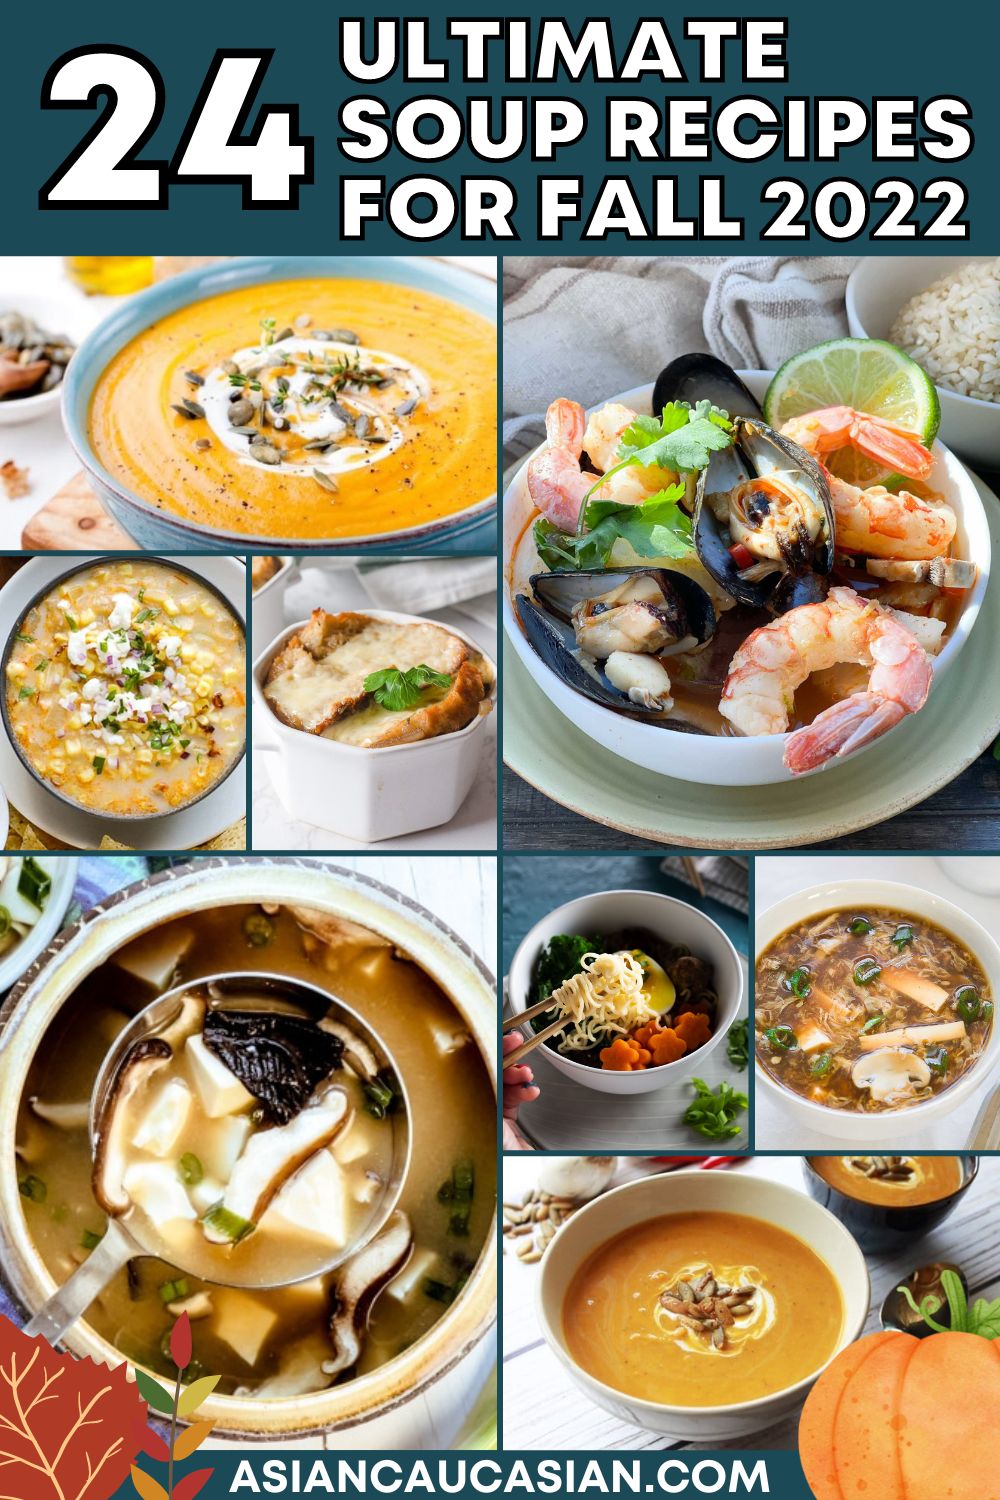 A roundup grid of cozy soup recipes from pumpkin soup to seafood soup.